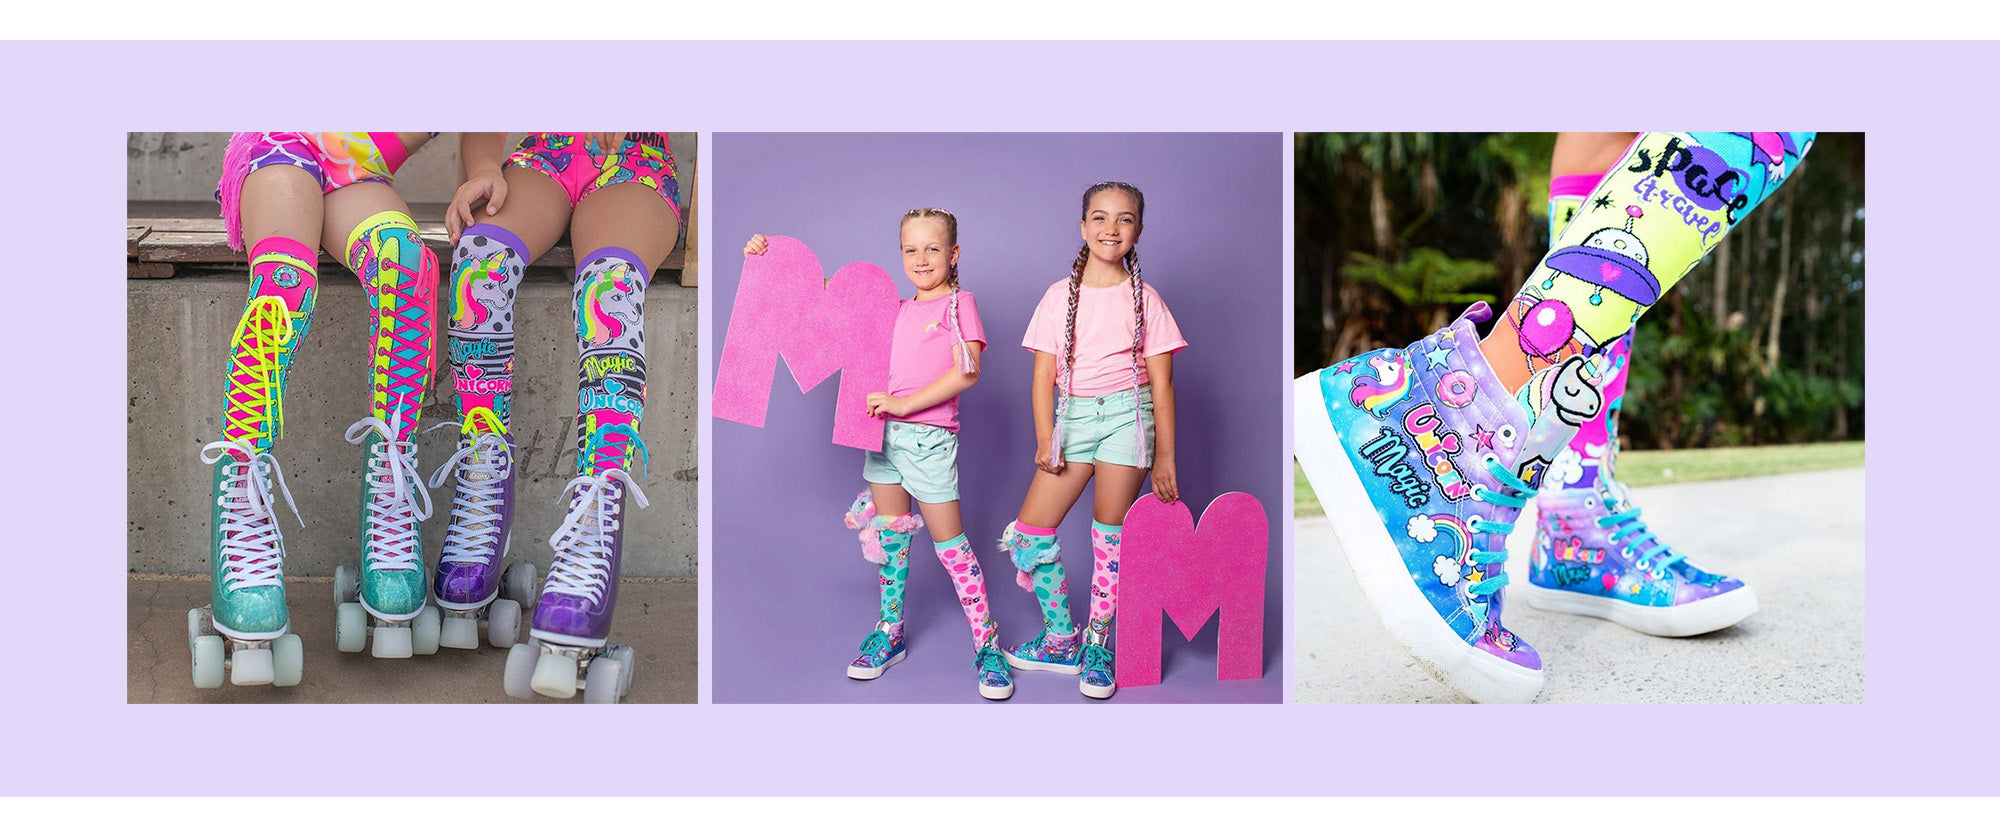 Kids fads come and go but Madmia socks are guaranteed to outlive most! Check out just what all the excitement about and why crazy Madmia socks are the must-have stocking stuffer for Christmas 2020!